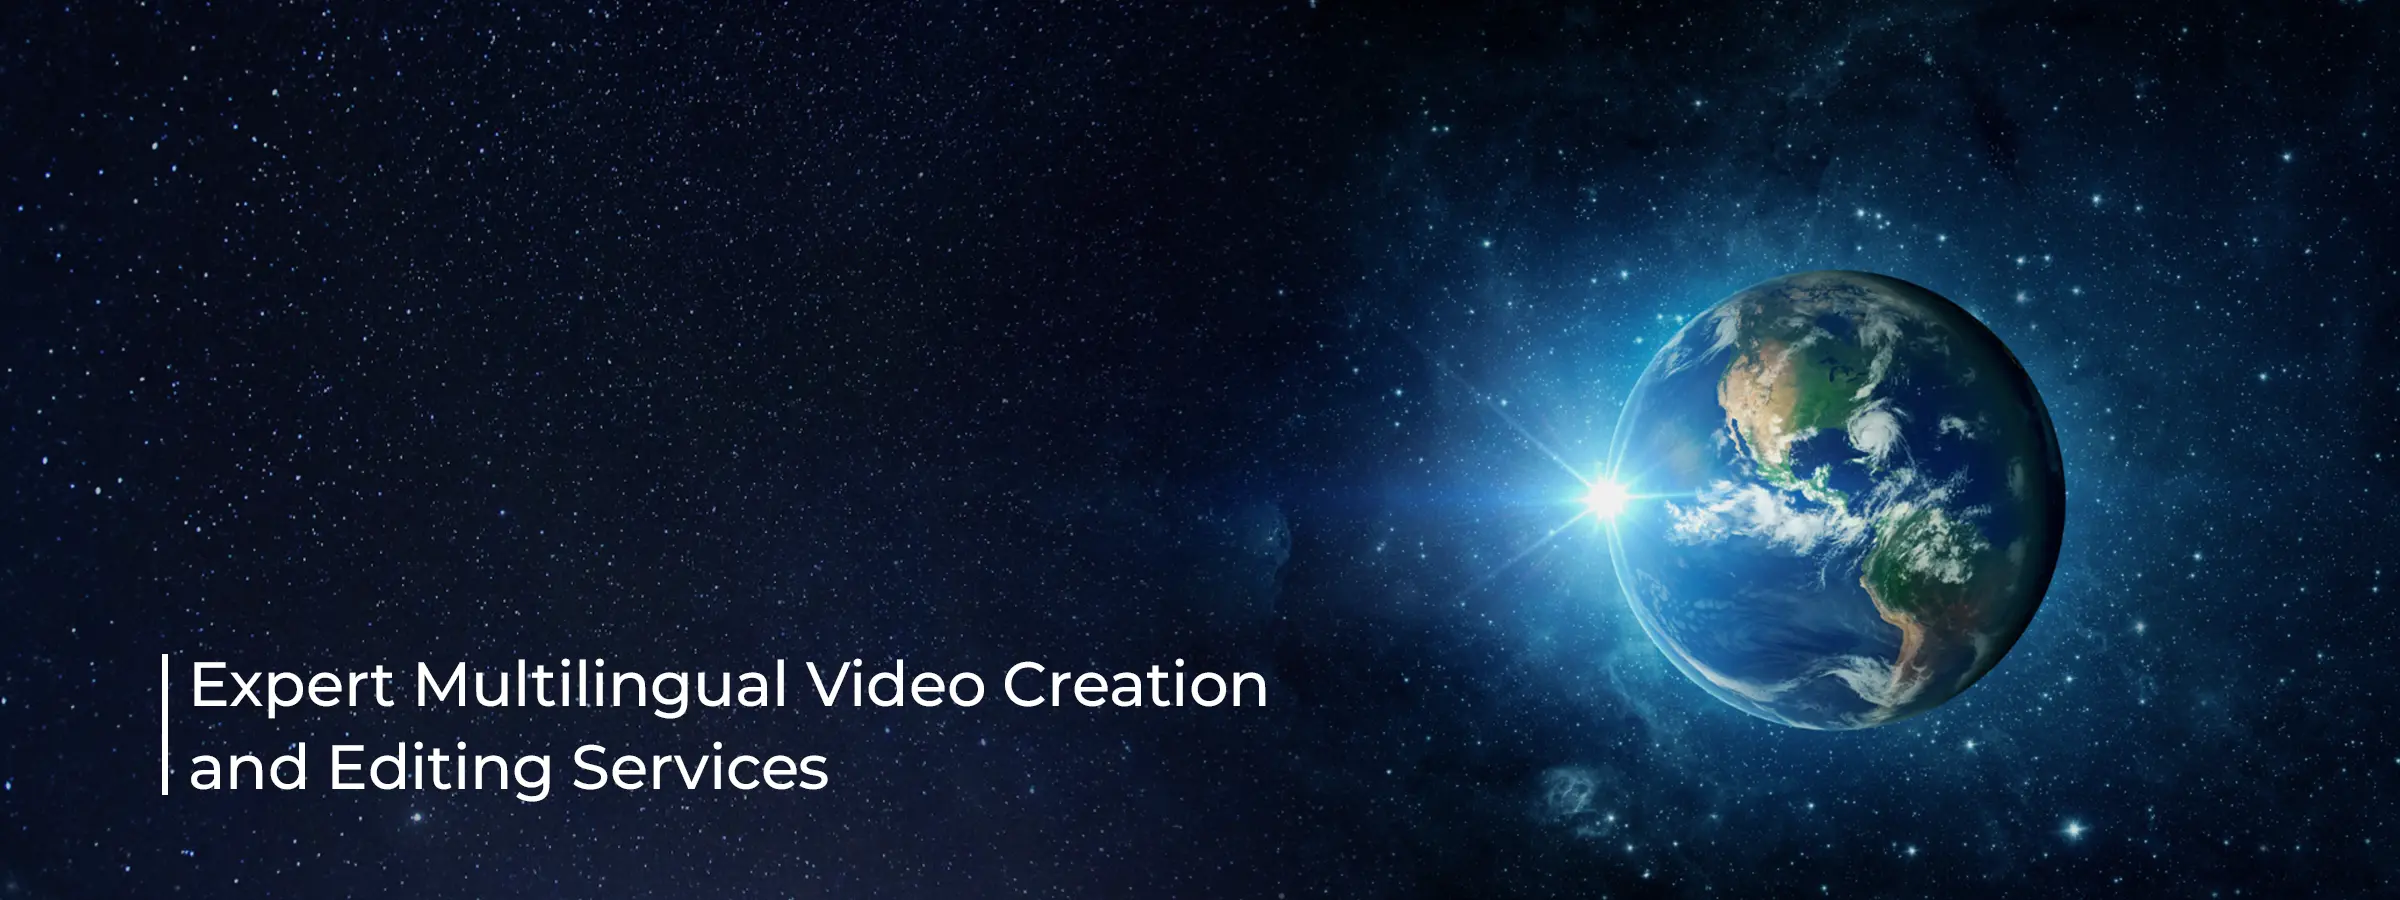 multilingual-video-creation-and-editing-service-industry